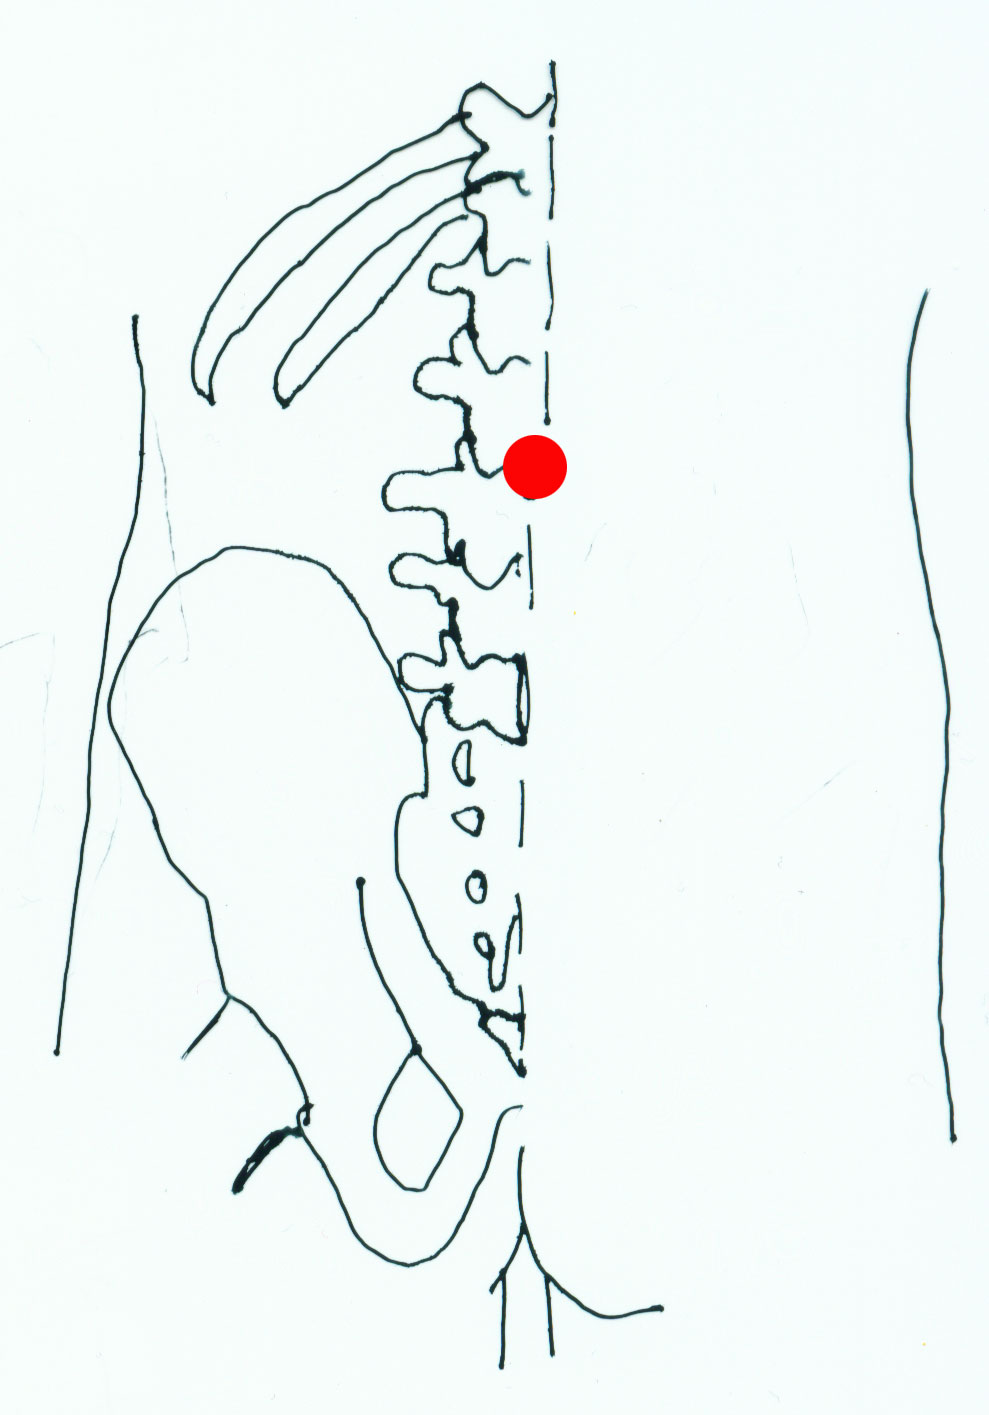 ming men - acupuncture point picture